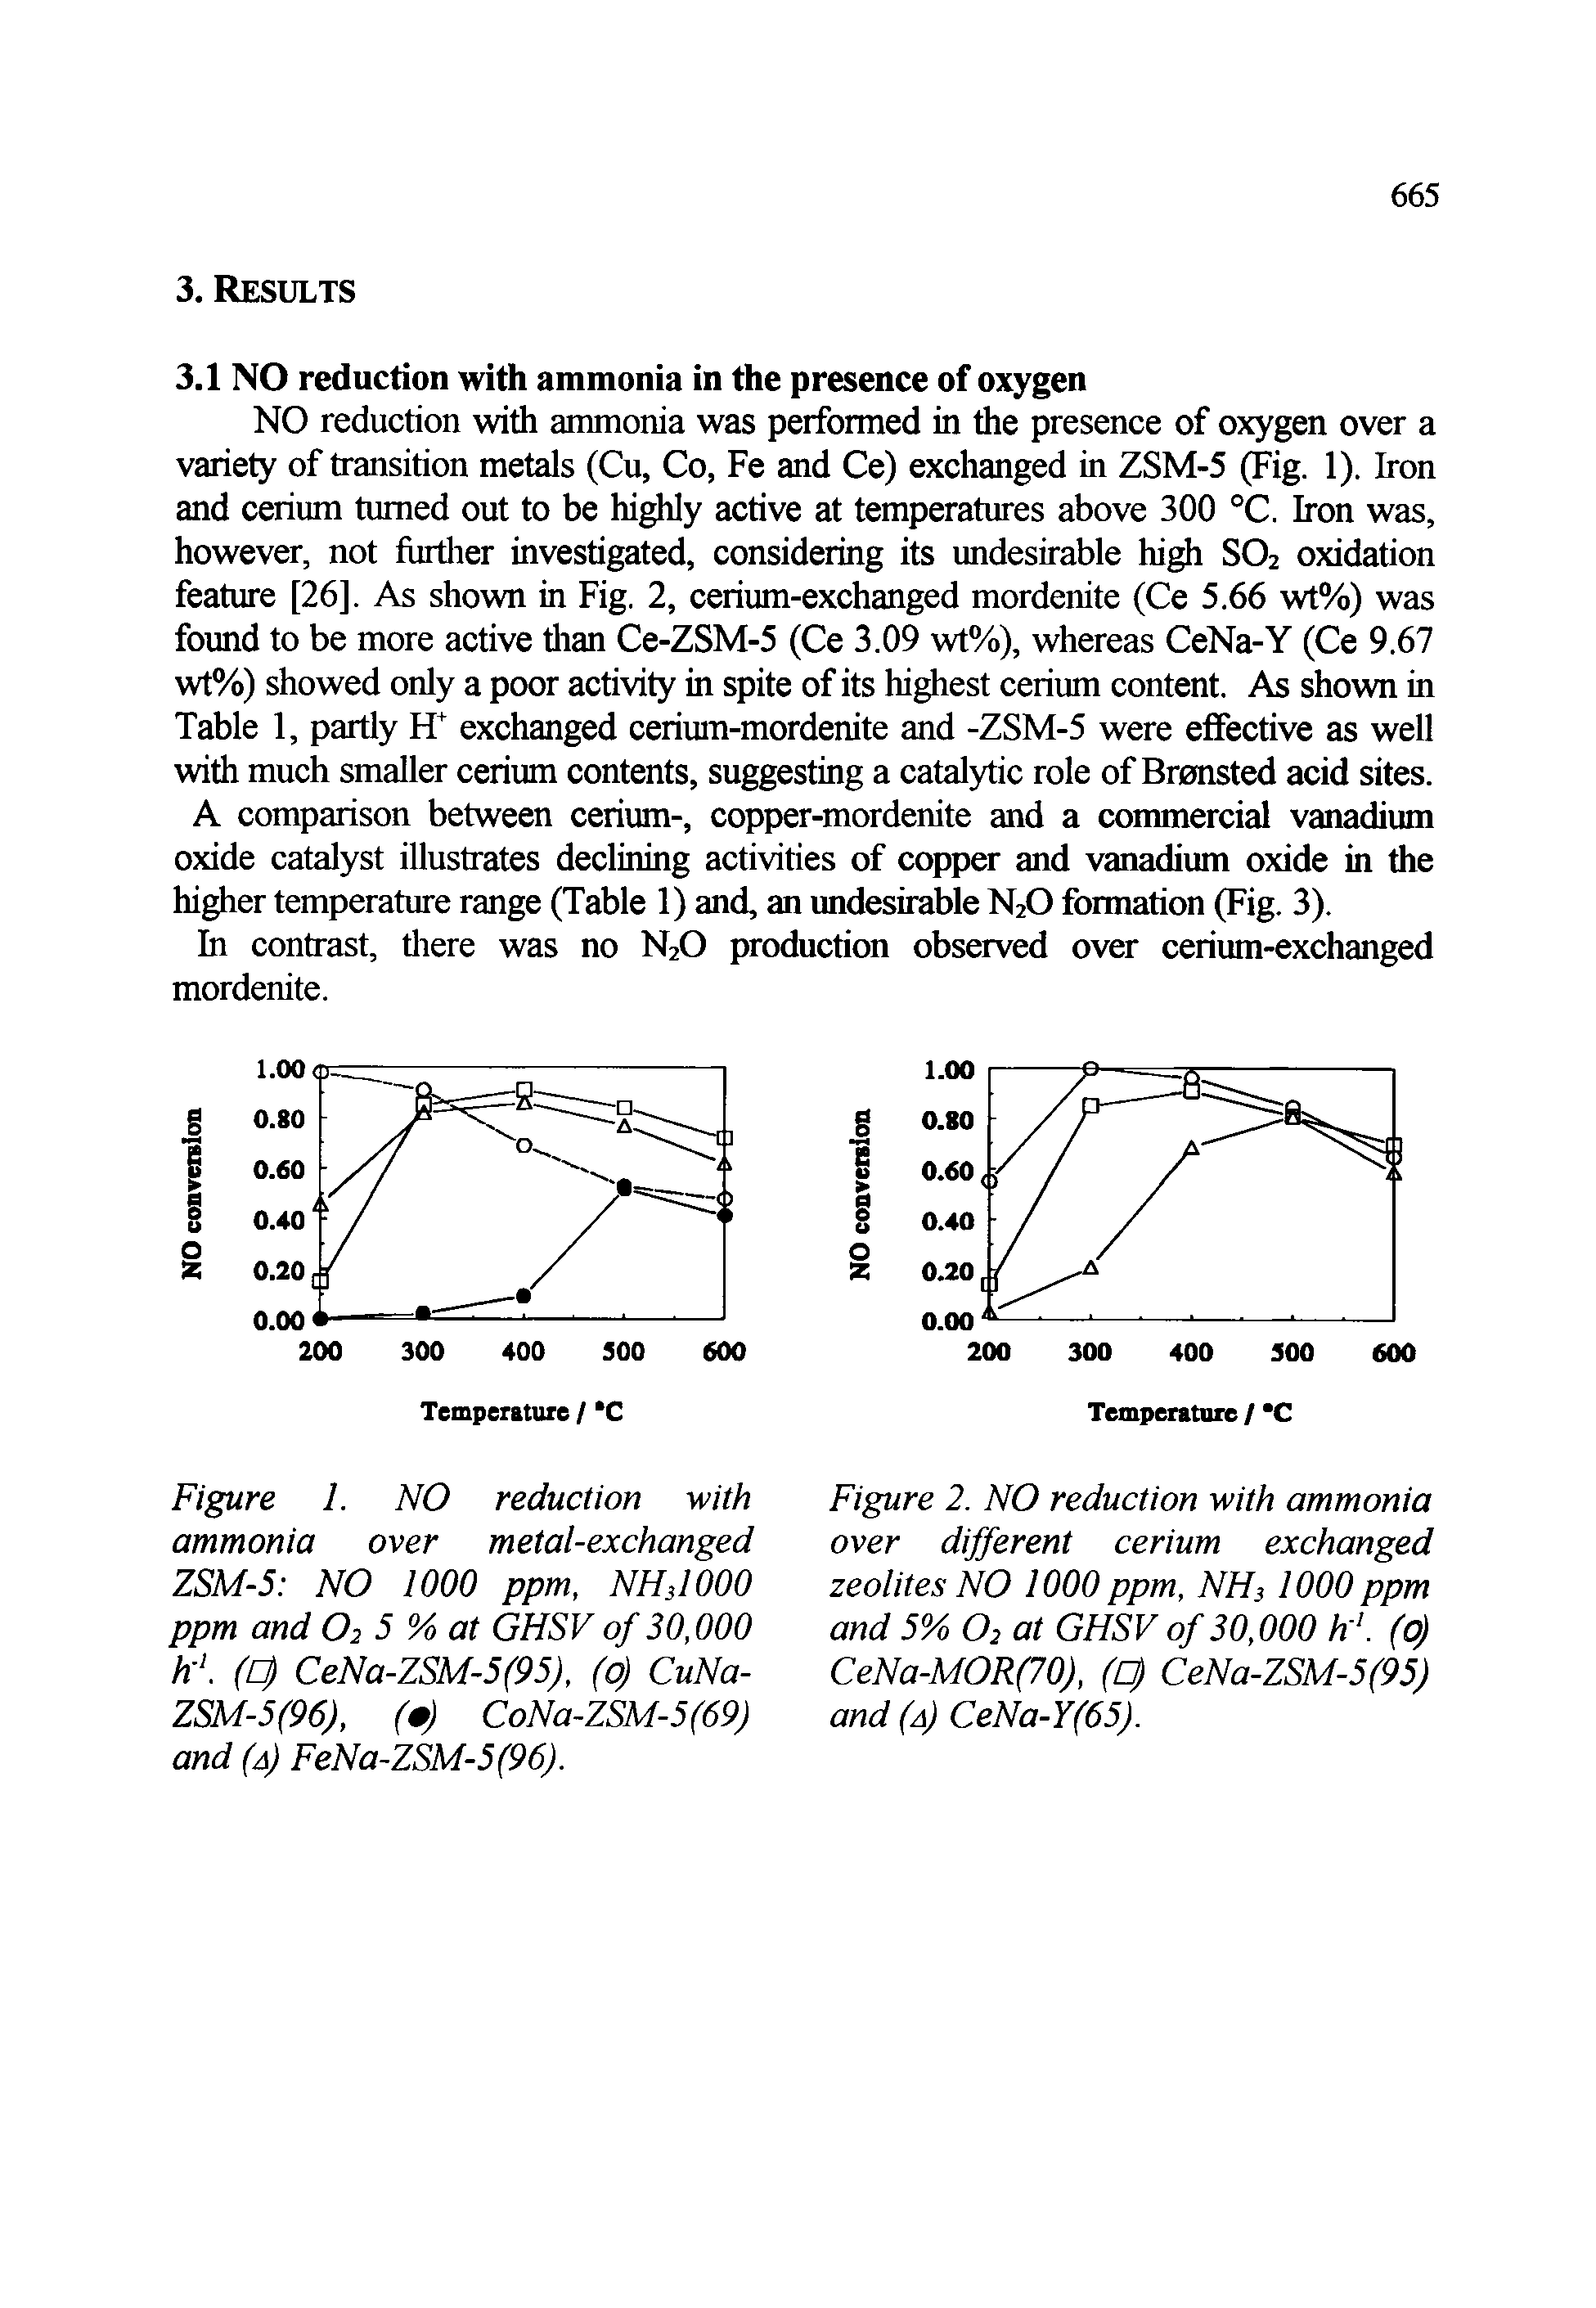 Figure 2. NO reduction with ammonia over different cerium exchanged zeolites NO 1000 ppm, NH3 1000 ppm and 5% O2 at GHSV of 30,000 h . (0) CeNa-MOR(70), (O) CeNa-ZSM-5(95) and (a) CeNa-Y(65).